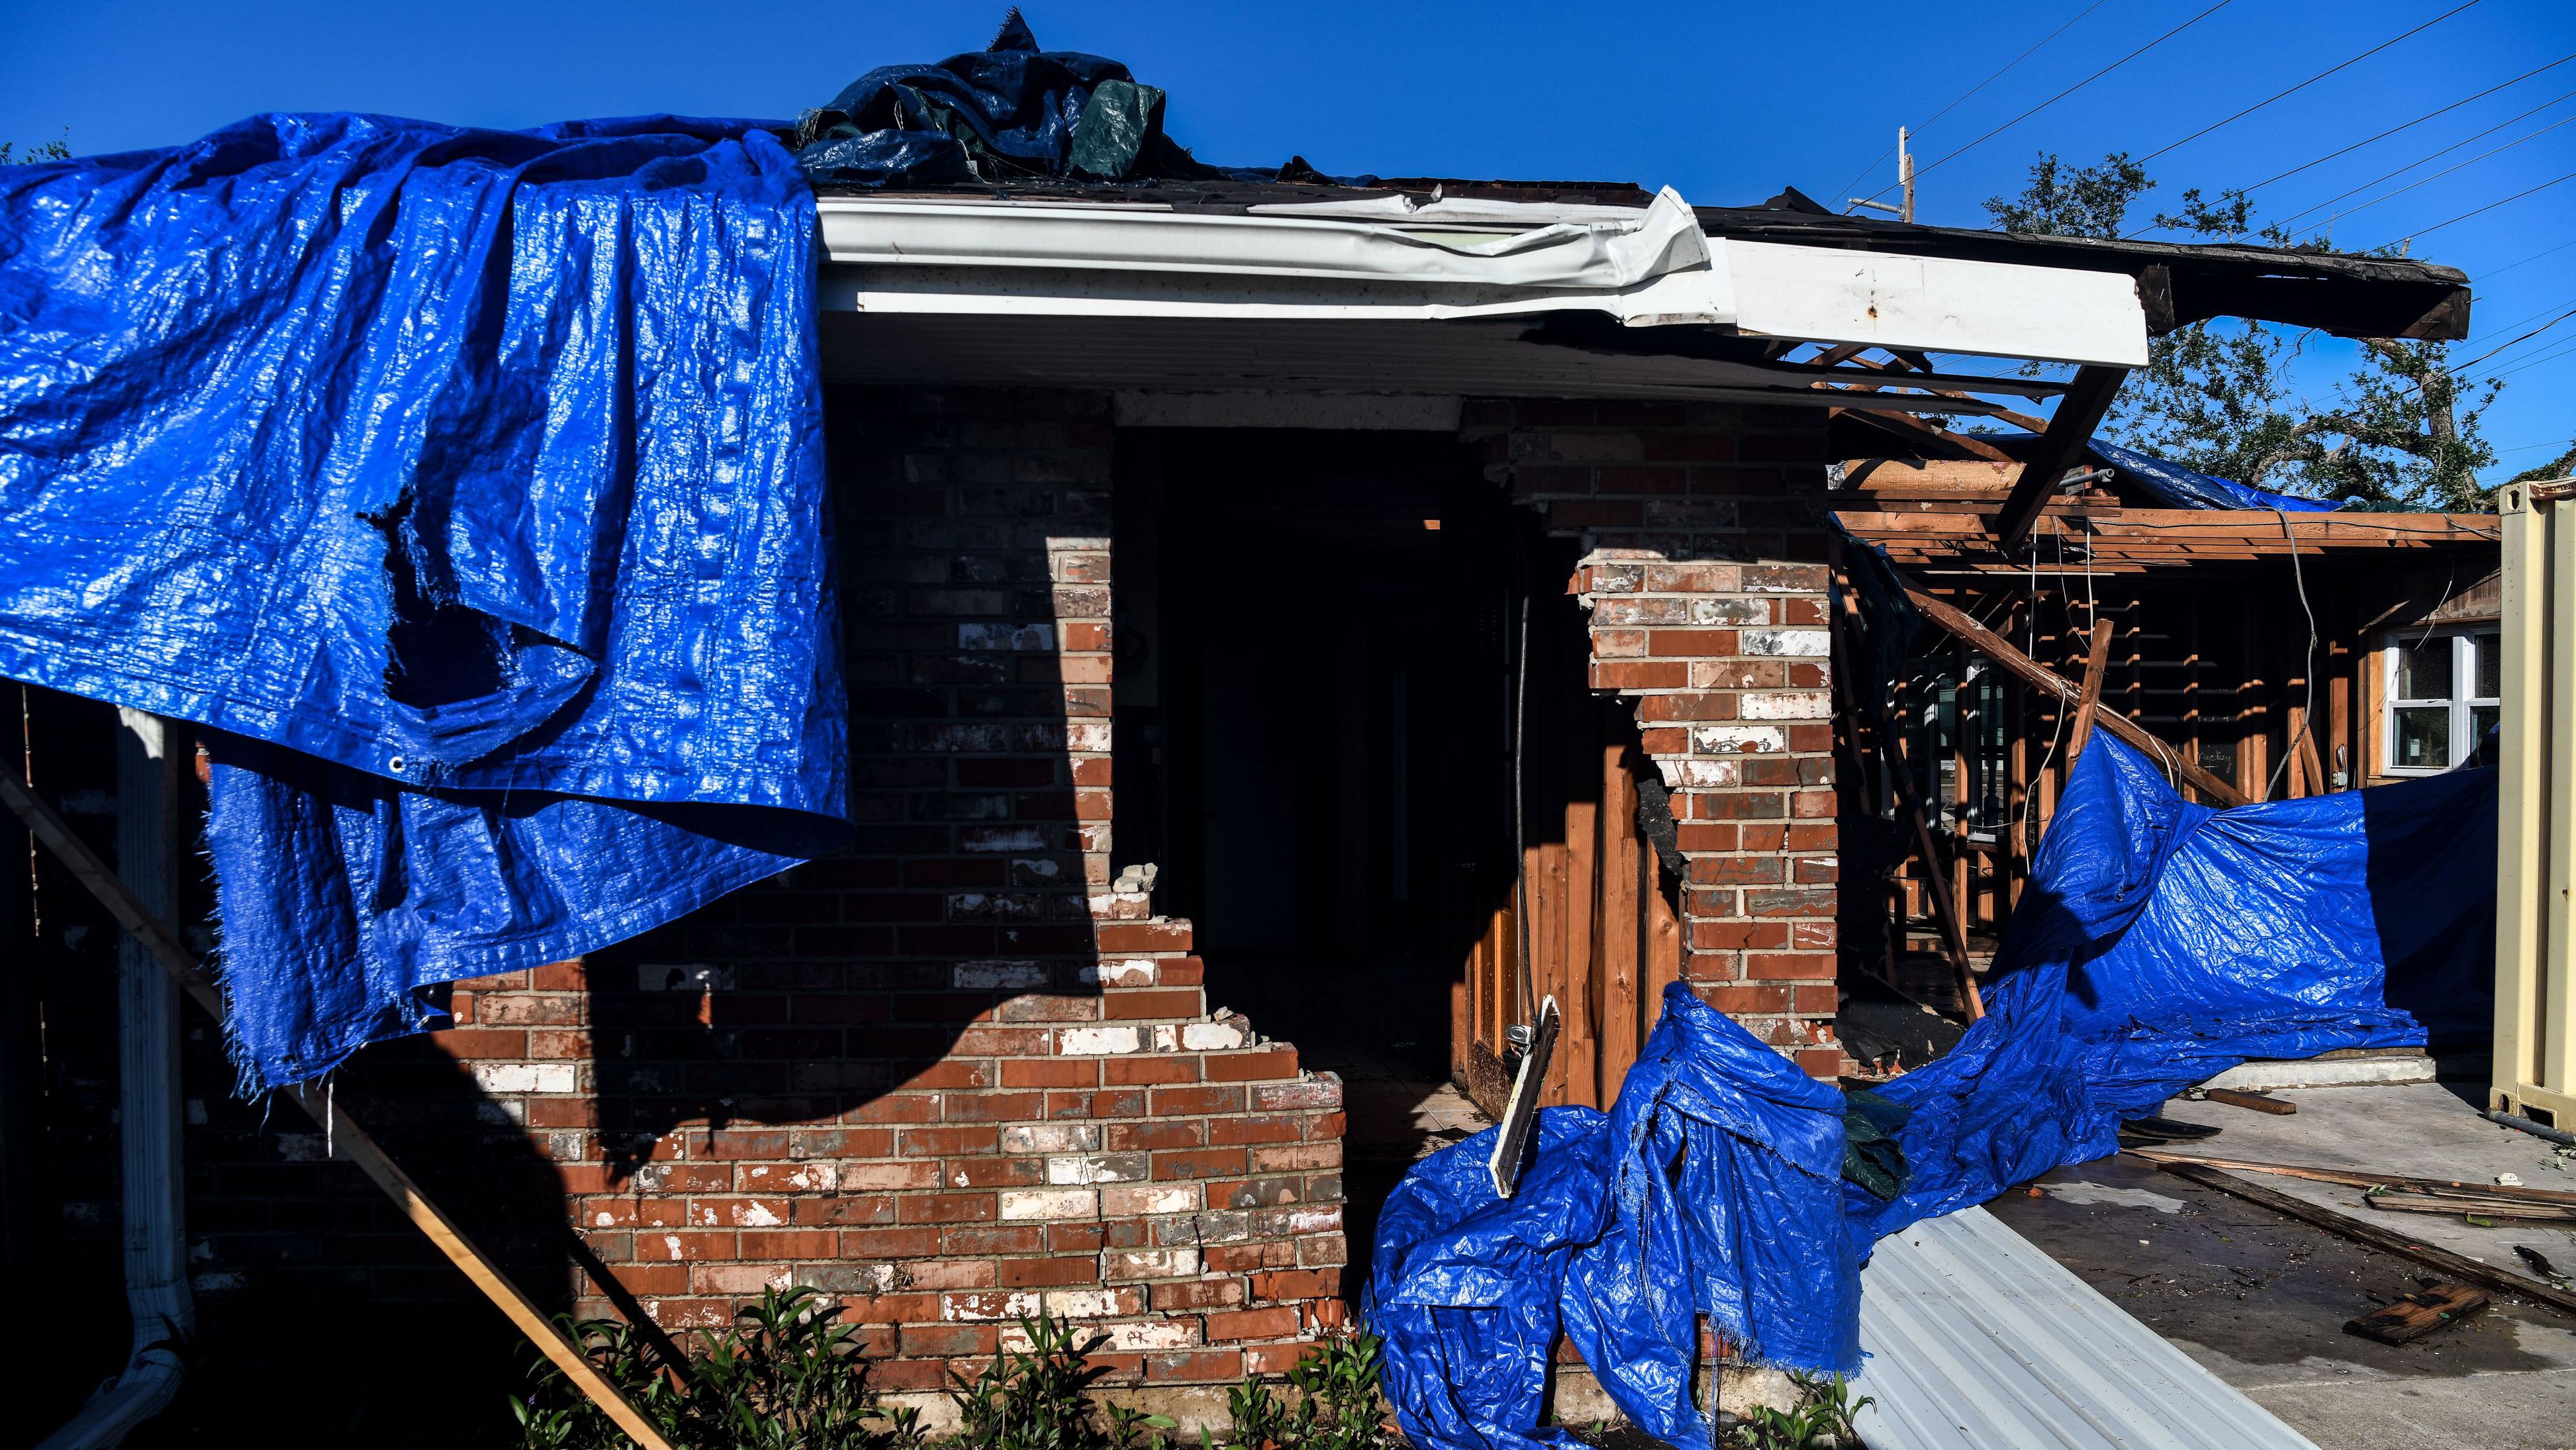 A badly damaged house in Lake Charles, Louisiana, on October 10, one day after the storm hit the area.